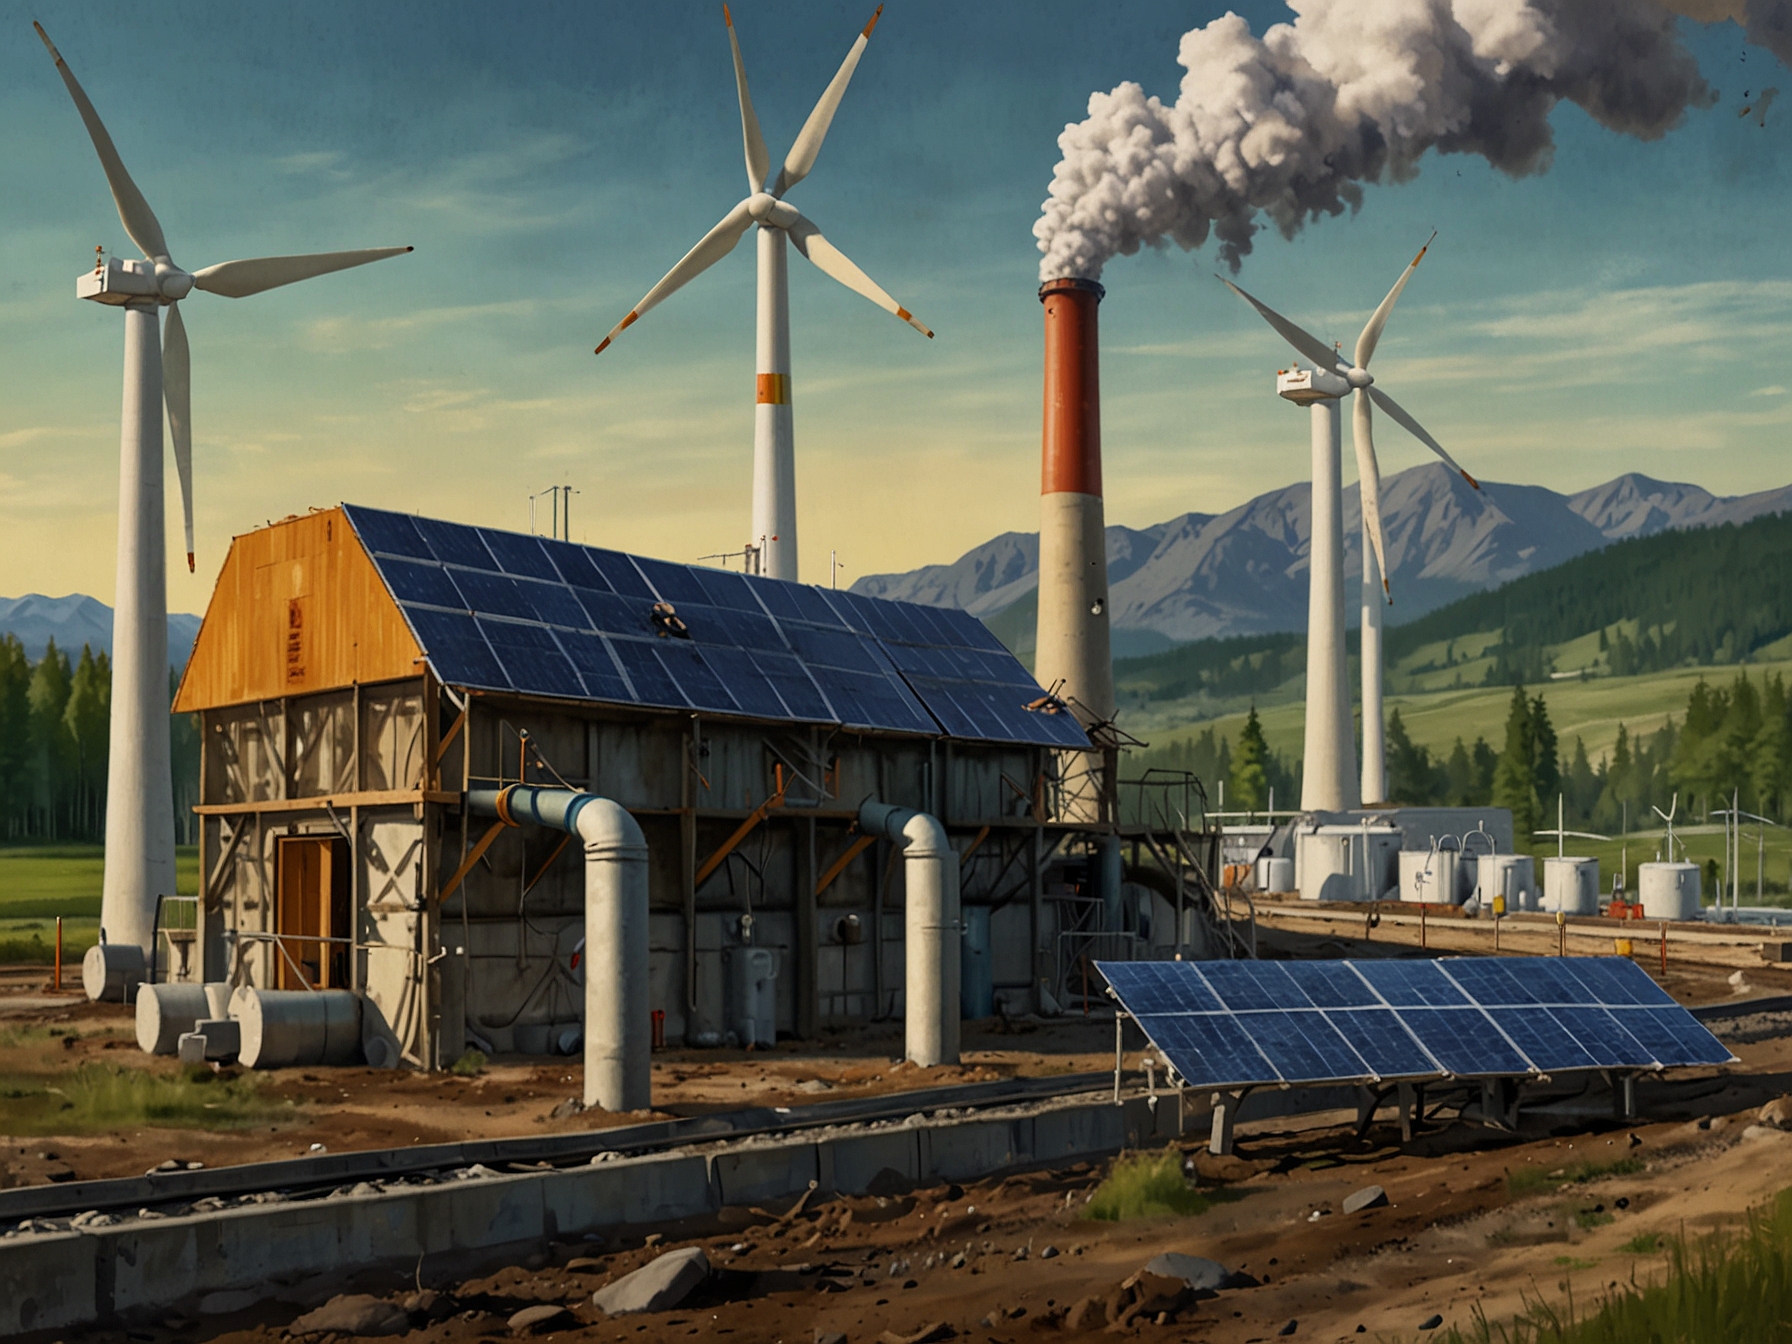 A juxtaposition of traditional fossil fuel infrastructure with renewable energy installations, highlighting the challenges Kinder Morgan faces in transitioning to a greener economy.